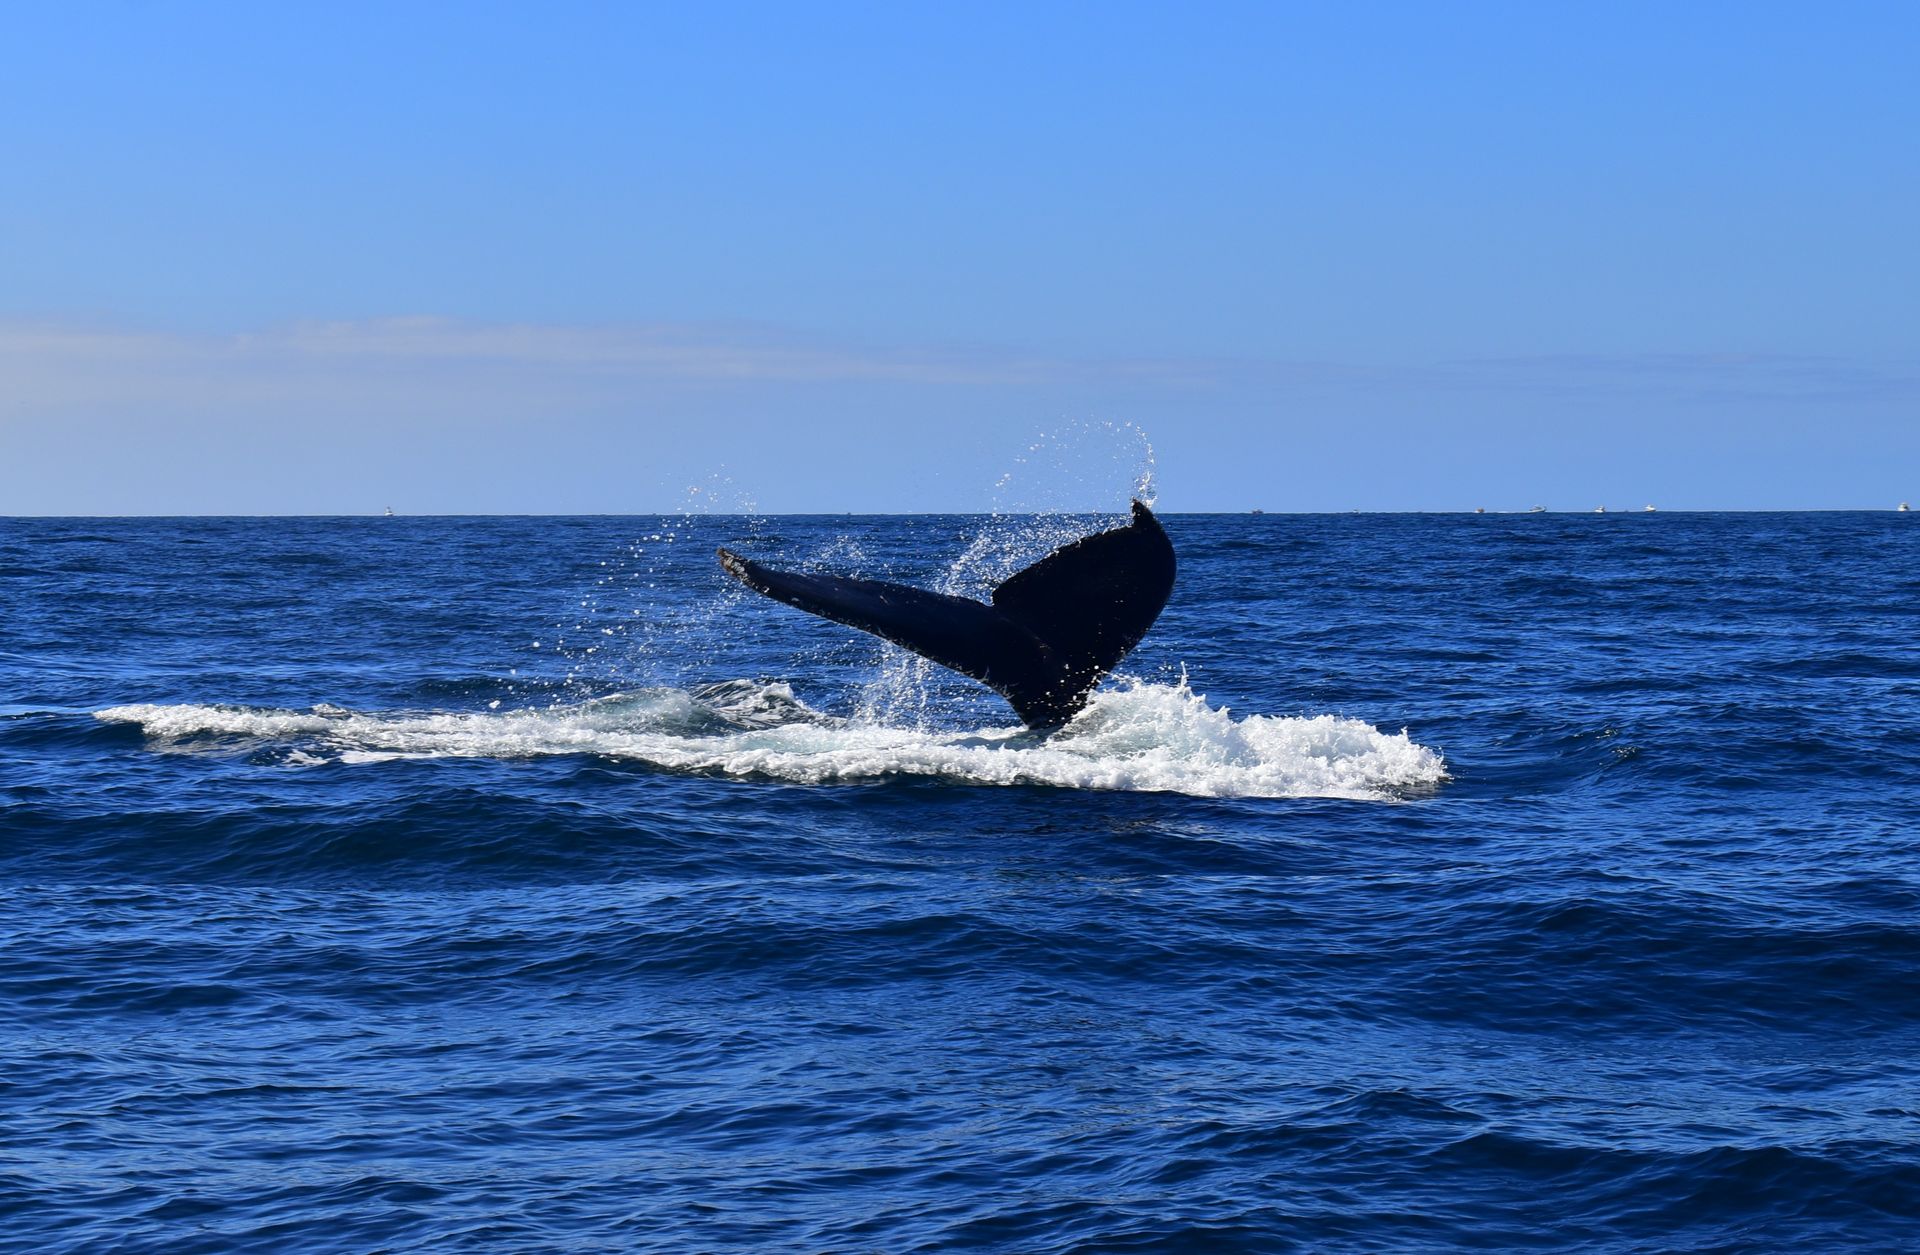 A humpback whale is swimming in the ocean.